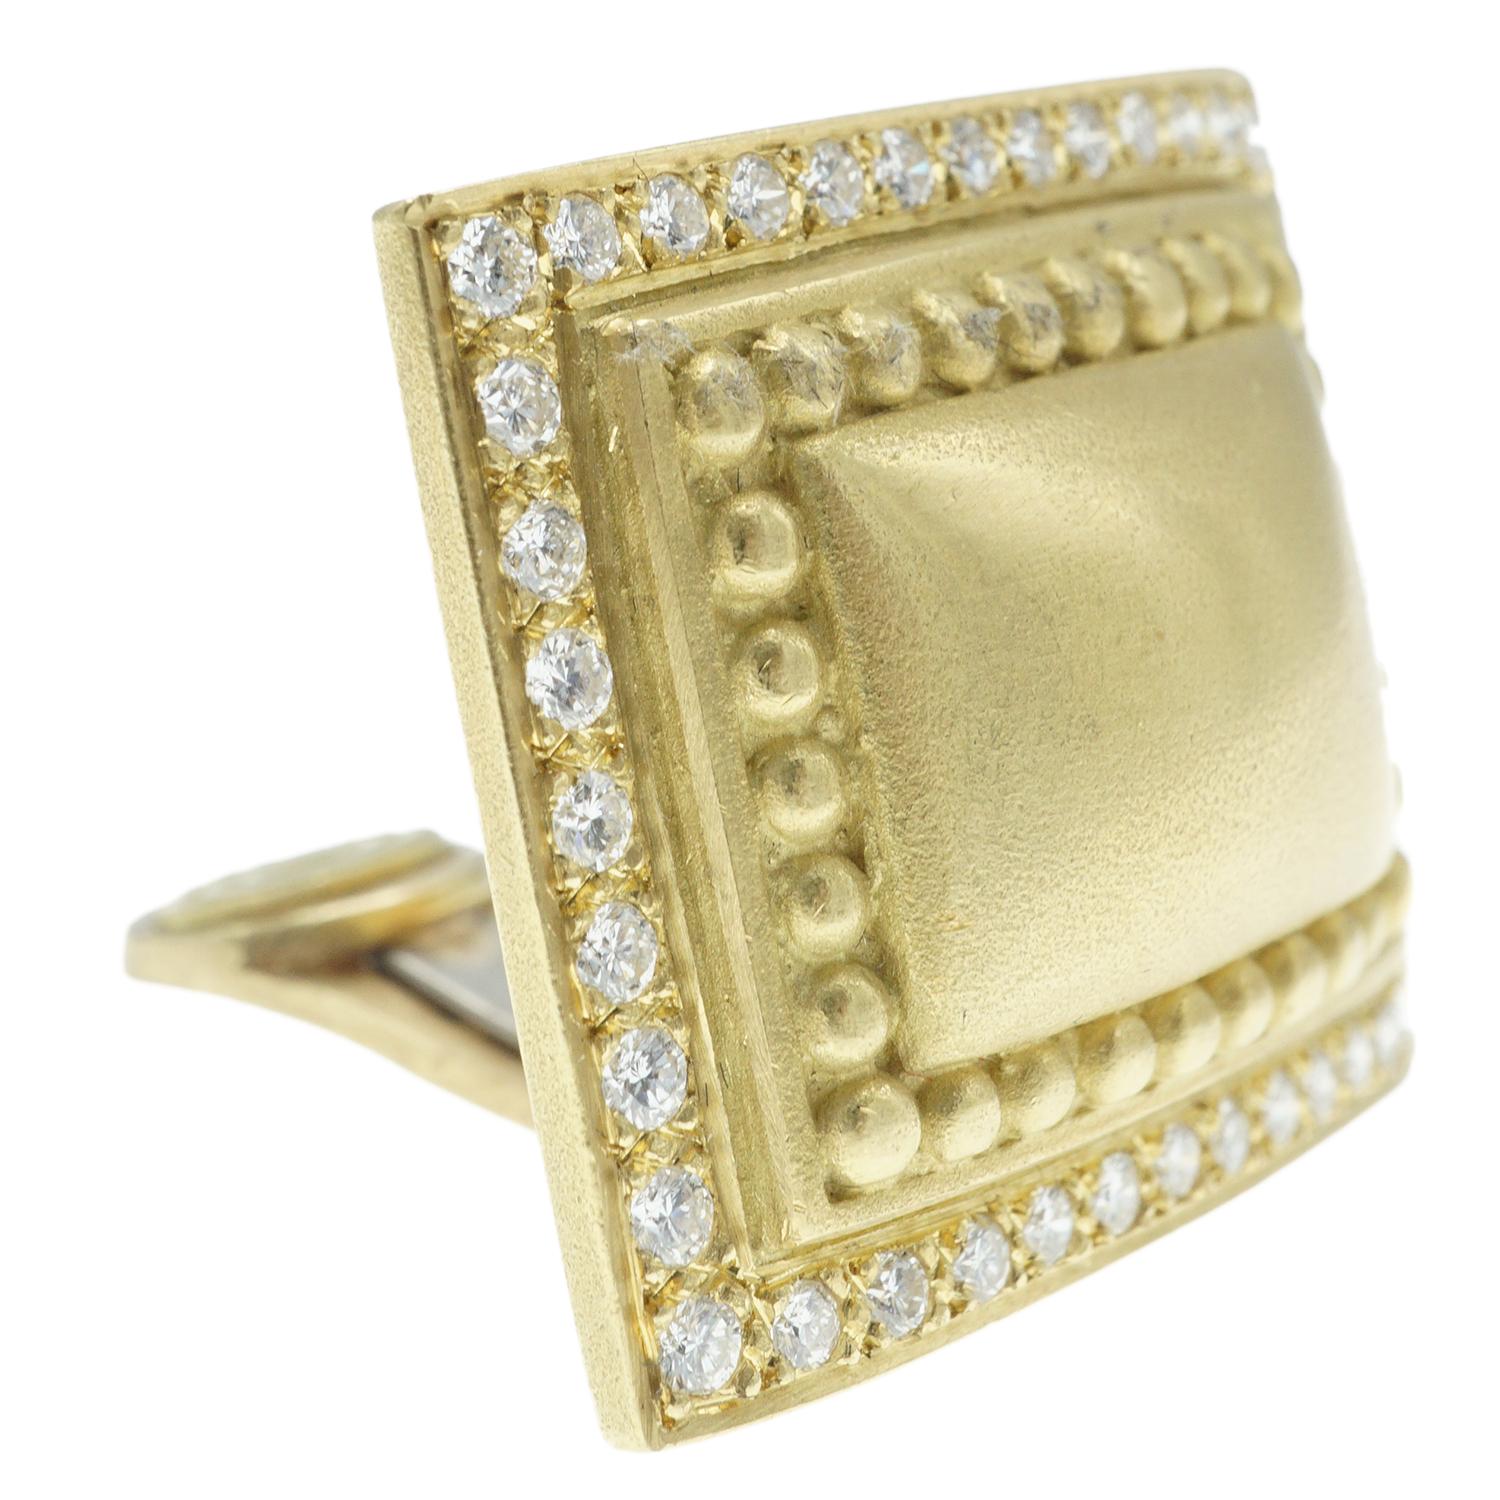 Crafted in 18 karat yellow gold featuring 80 round brilliant cut diamonds.  Signed B. Kieselstein Cord stamped 18k 198 with trademark.  Weighs 23.3 gr./15.0 dwt.  Dimensions L 15/16